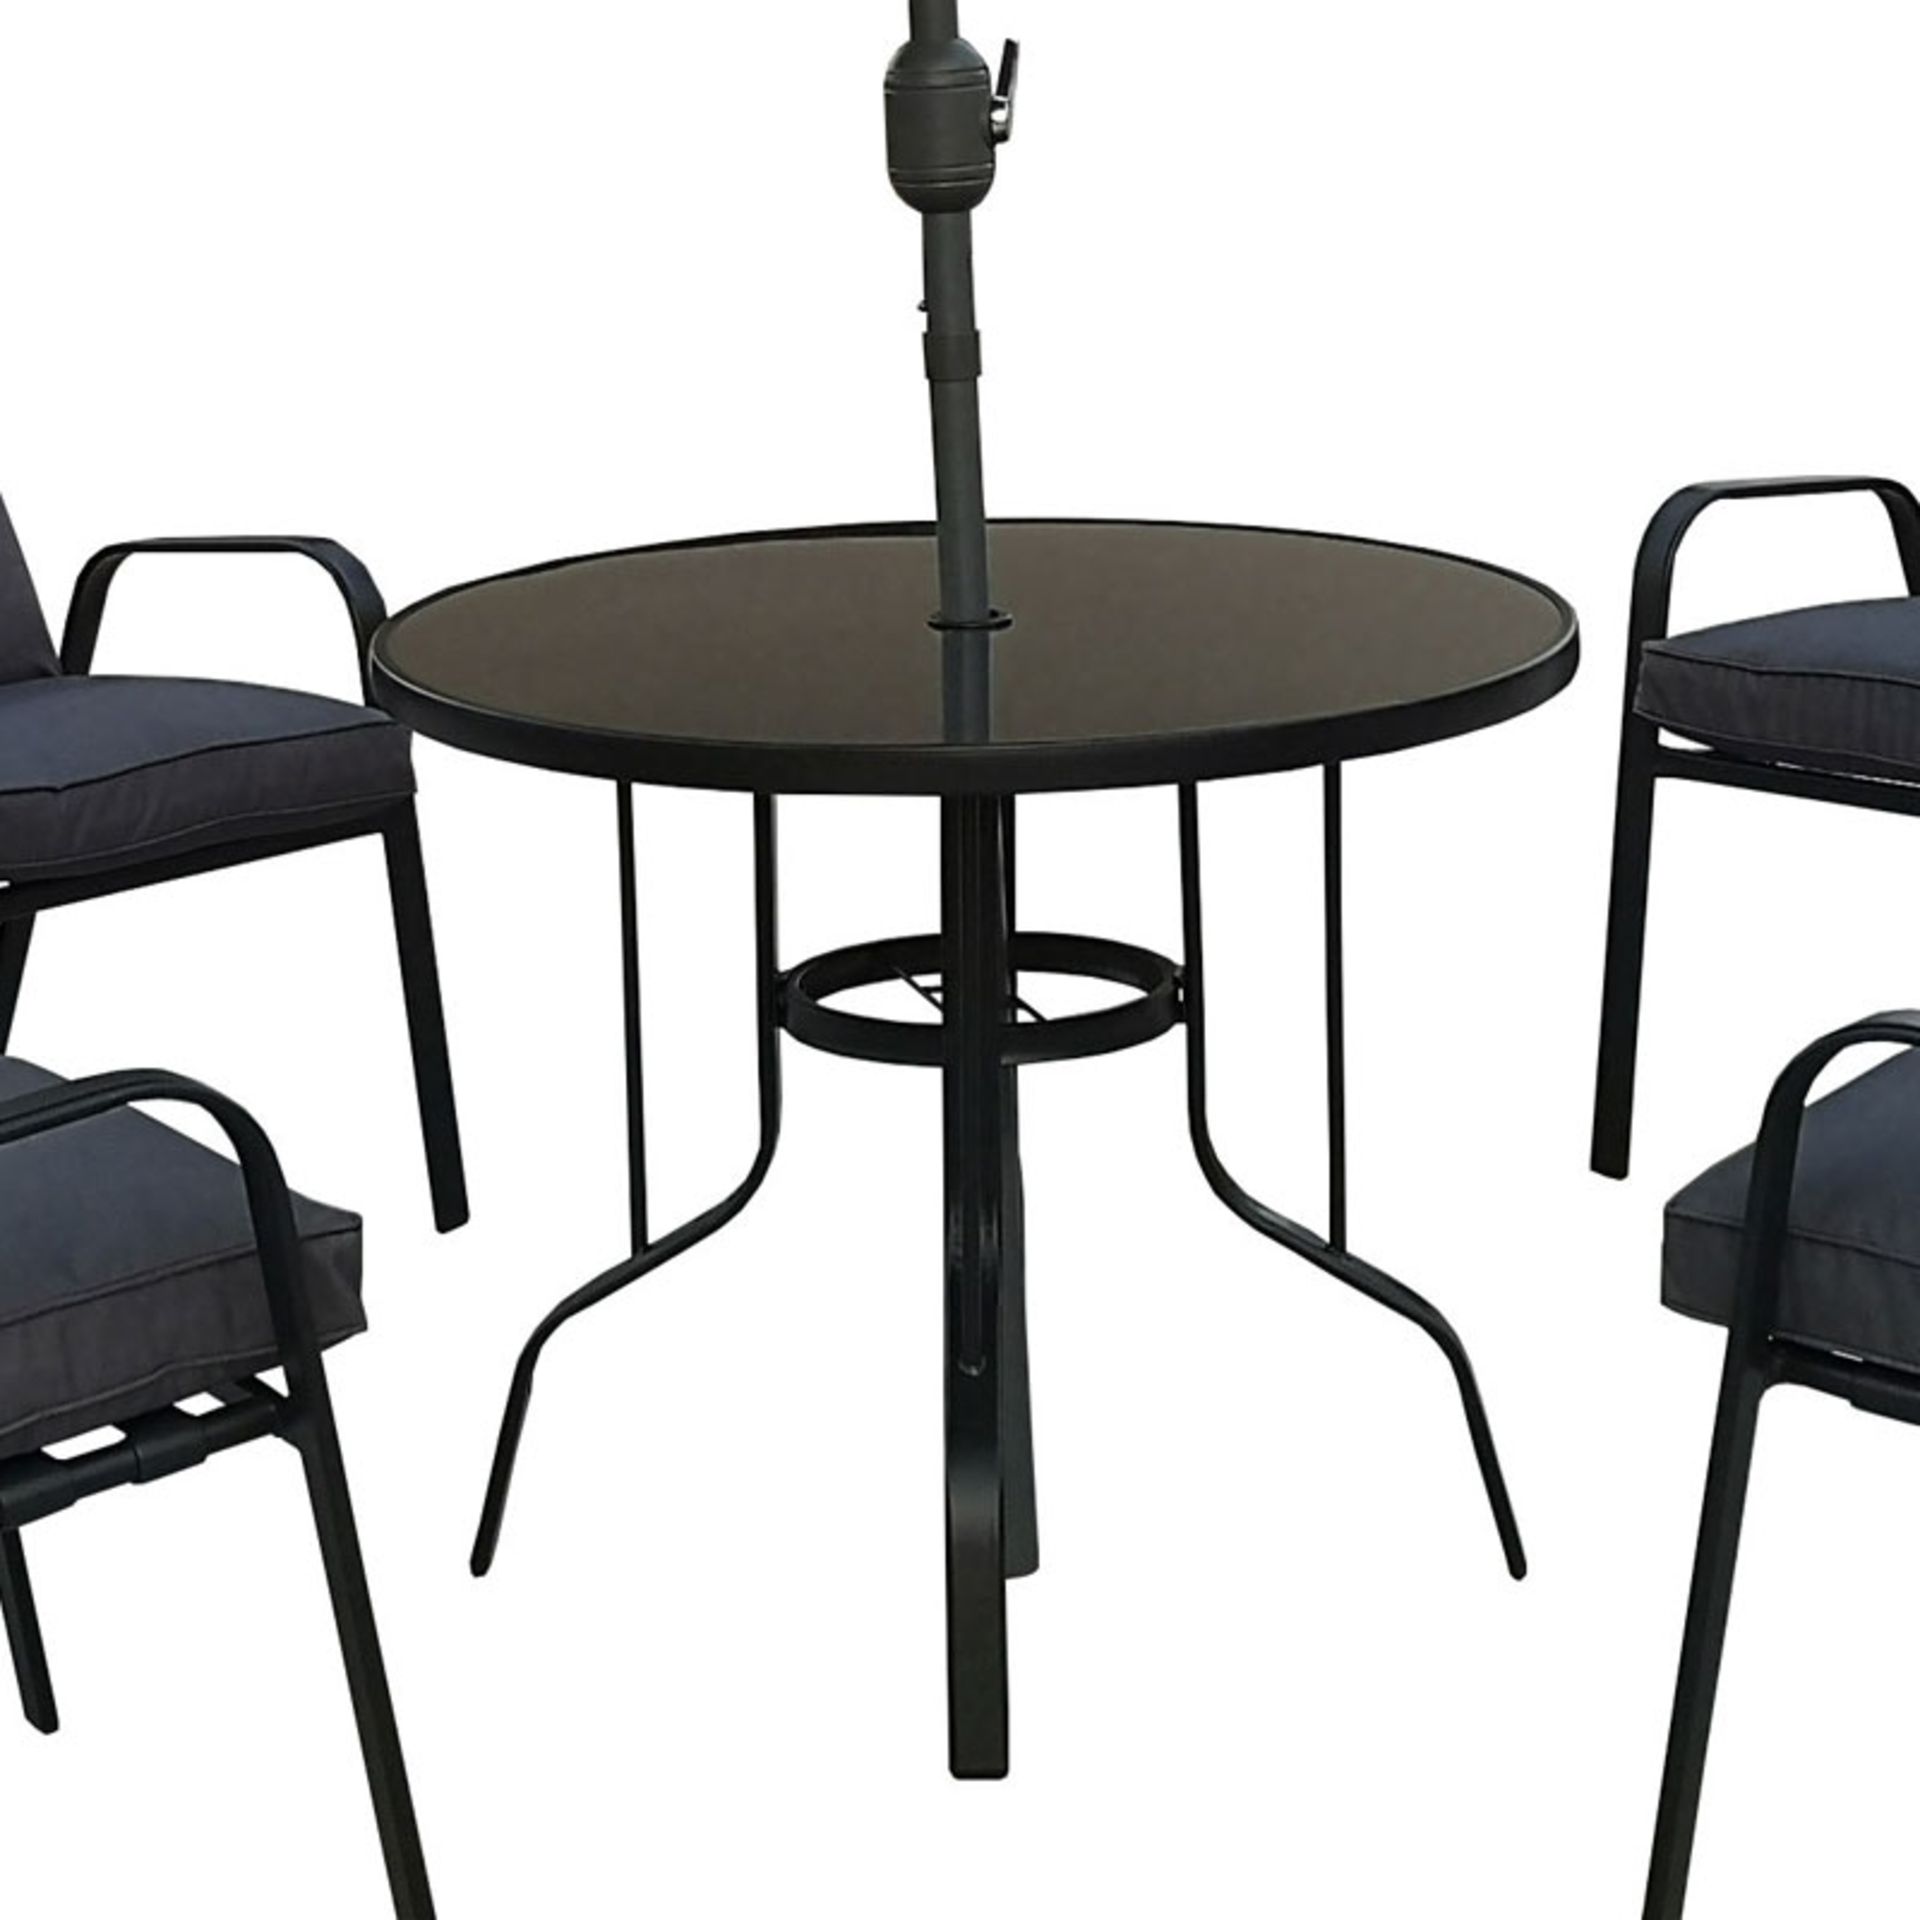 3 x Malvern 4 Seater Dining Set With Parasol - Image 2 of 3